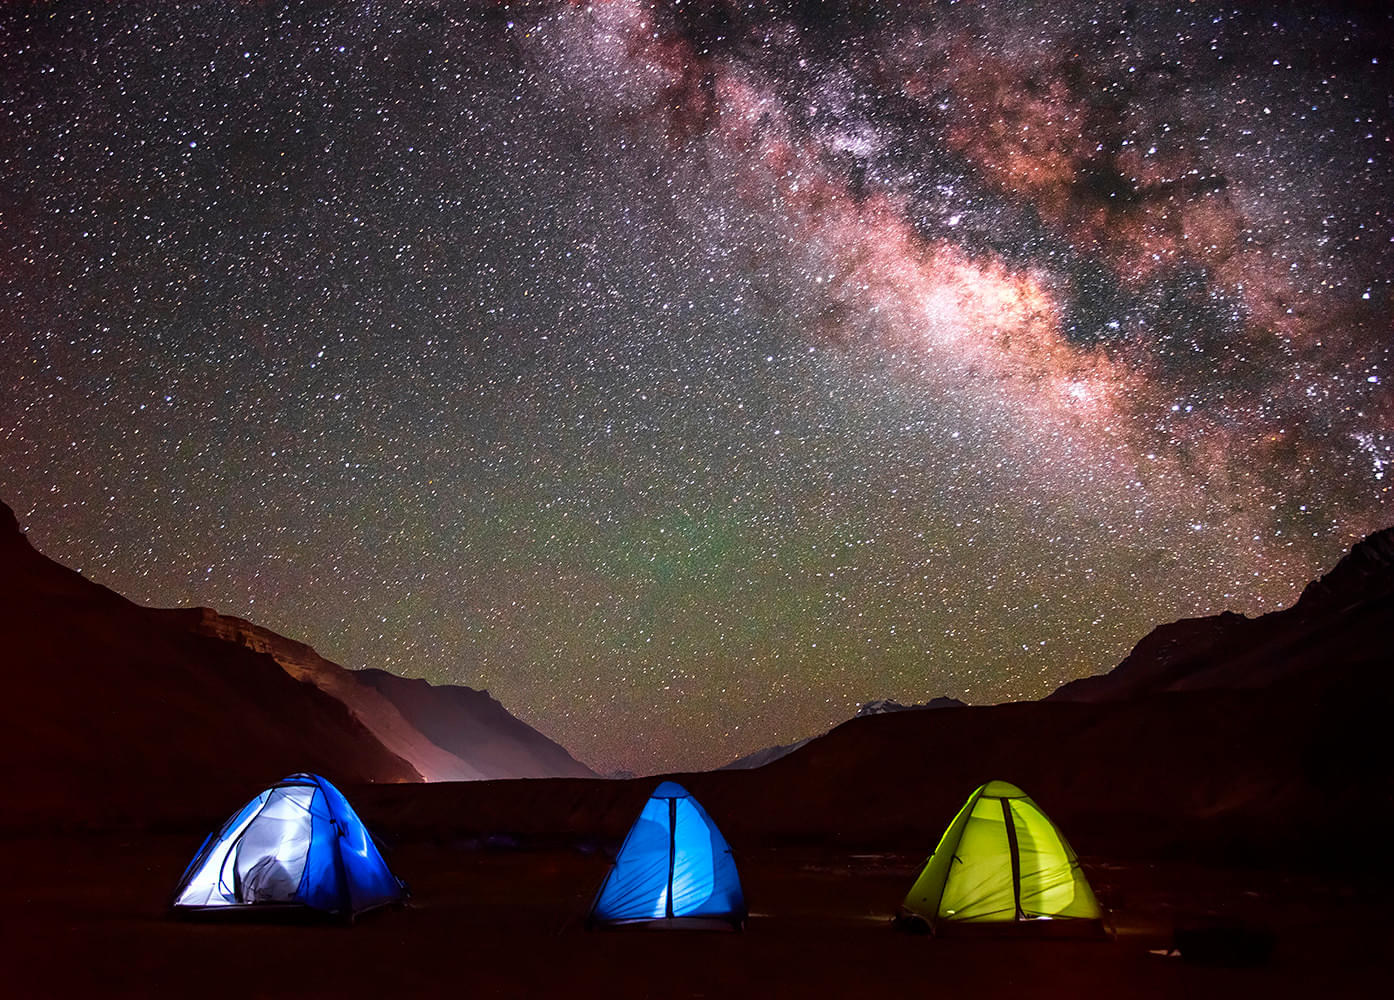 Enjoy camping and stargazing beside the river